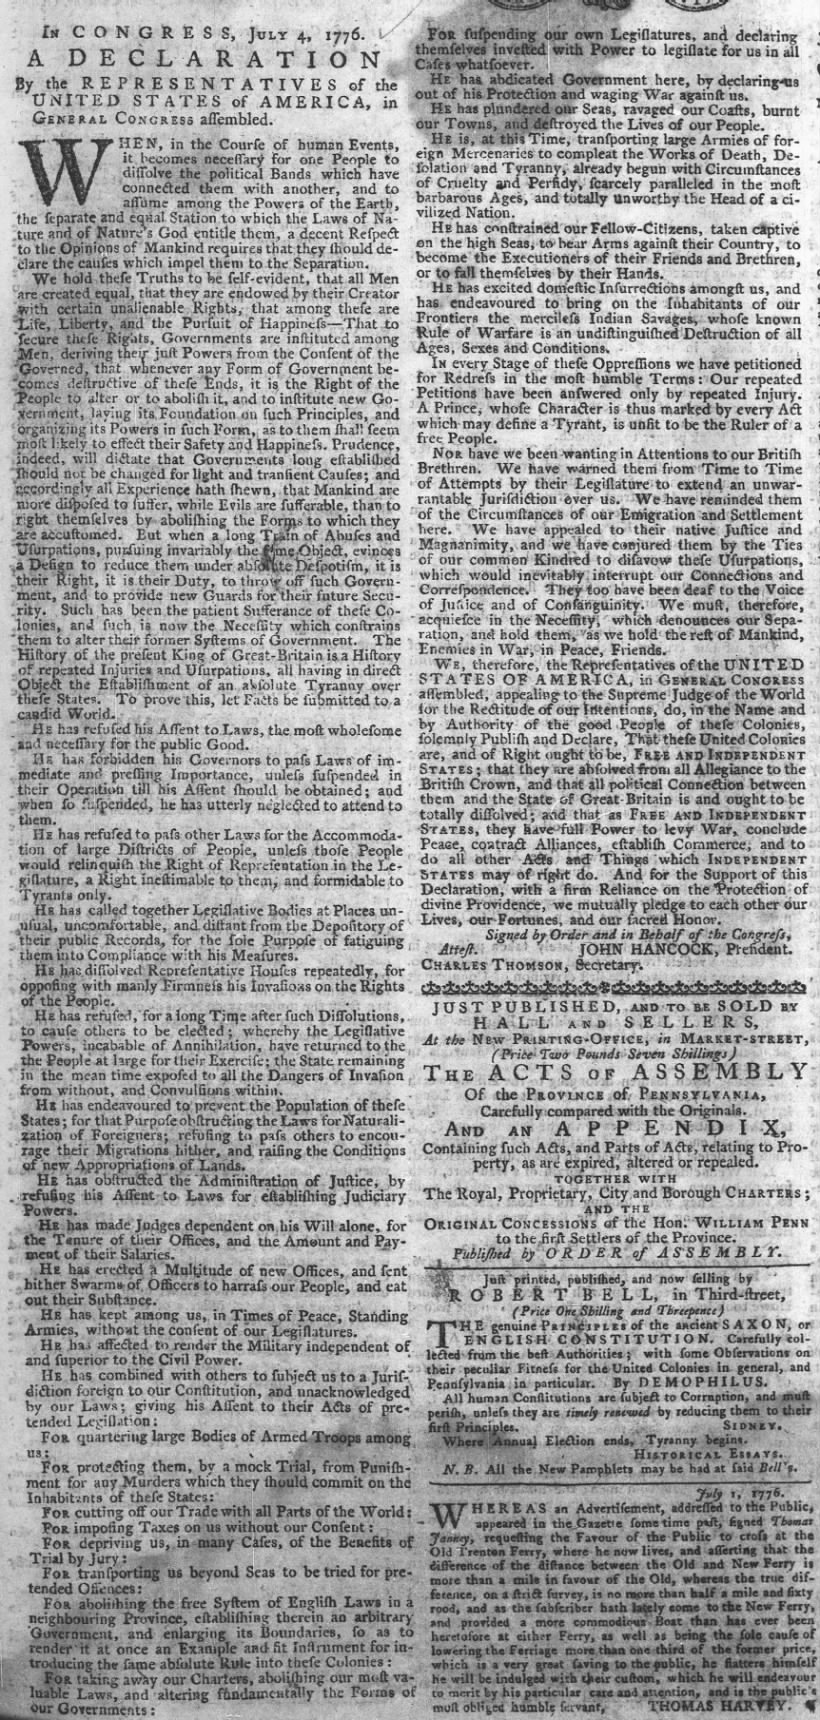 Copy of the Declaration of Independence printed in a Pennsylvania newspaper in July 1776